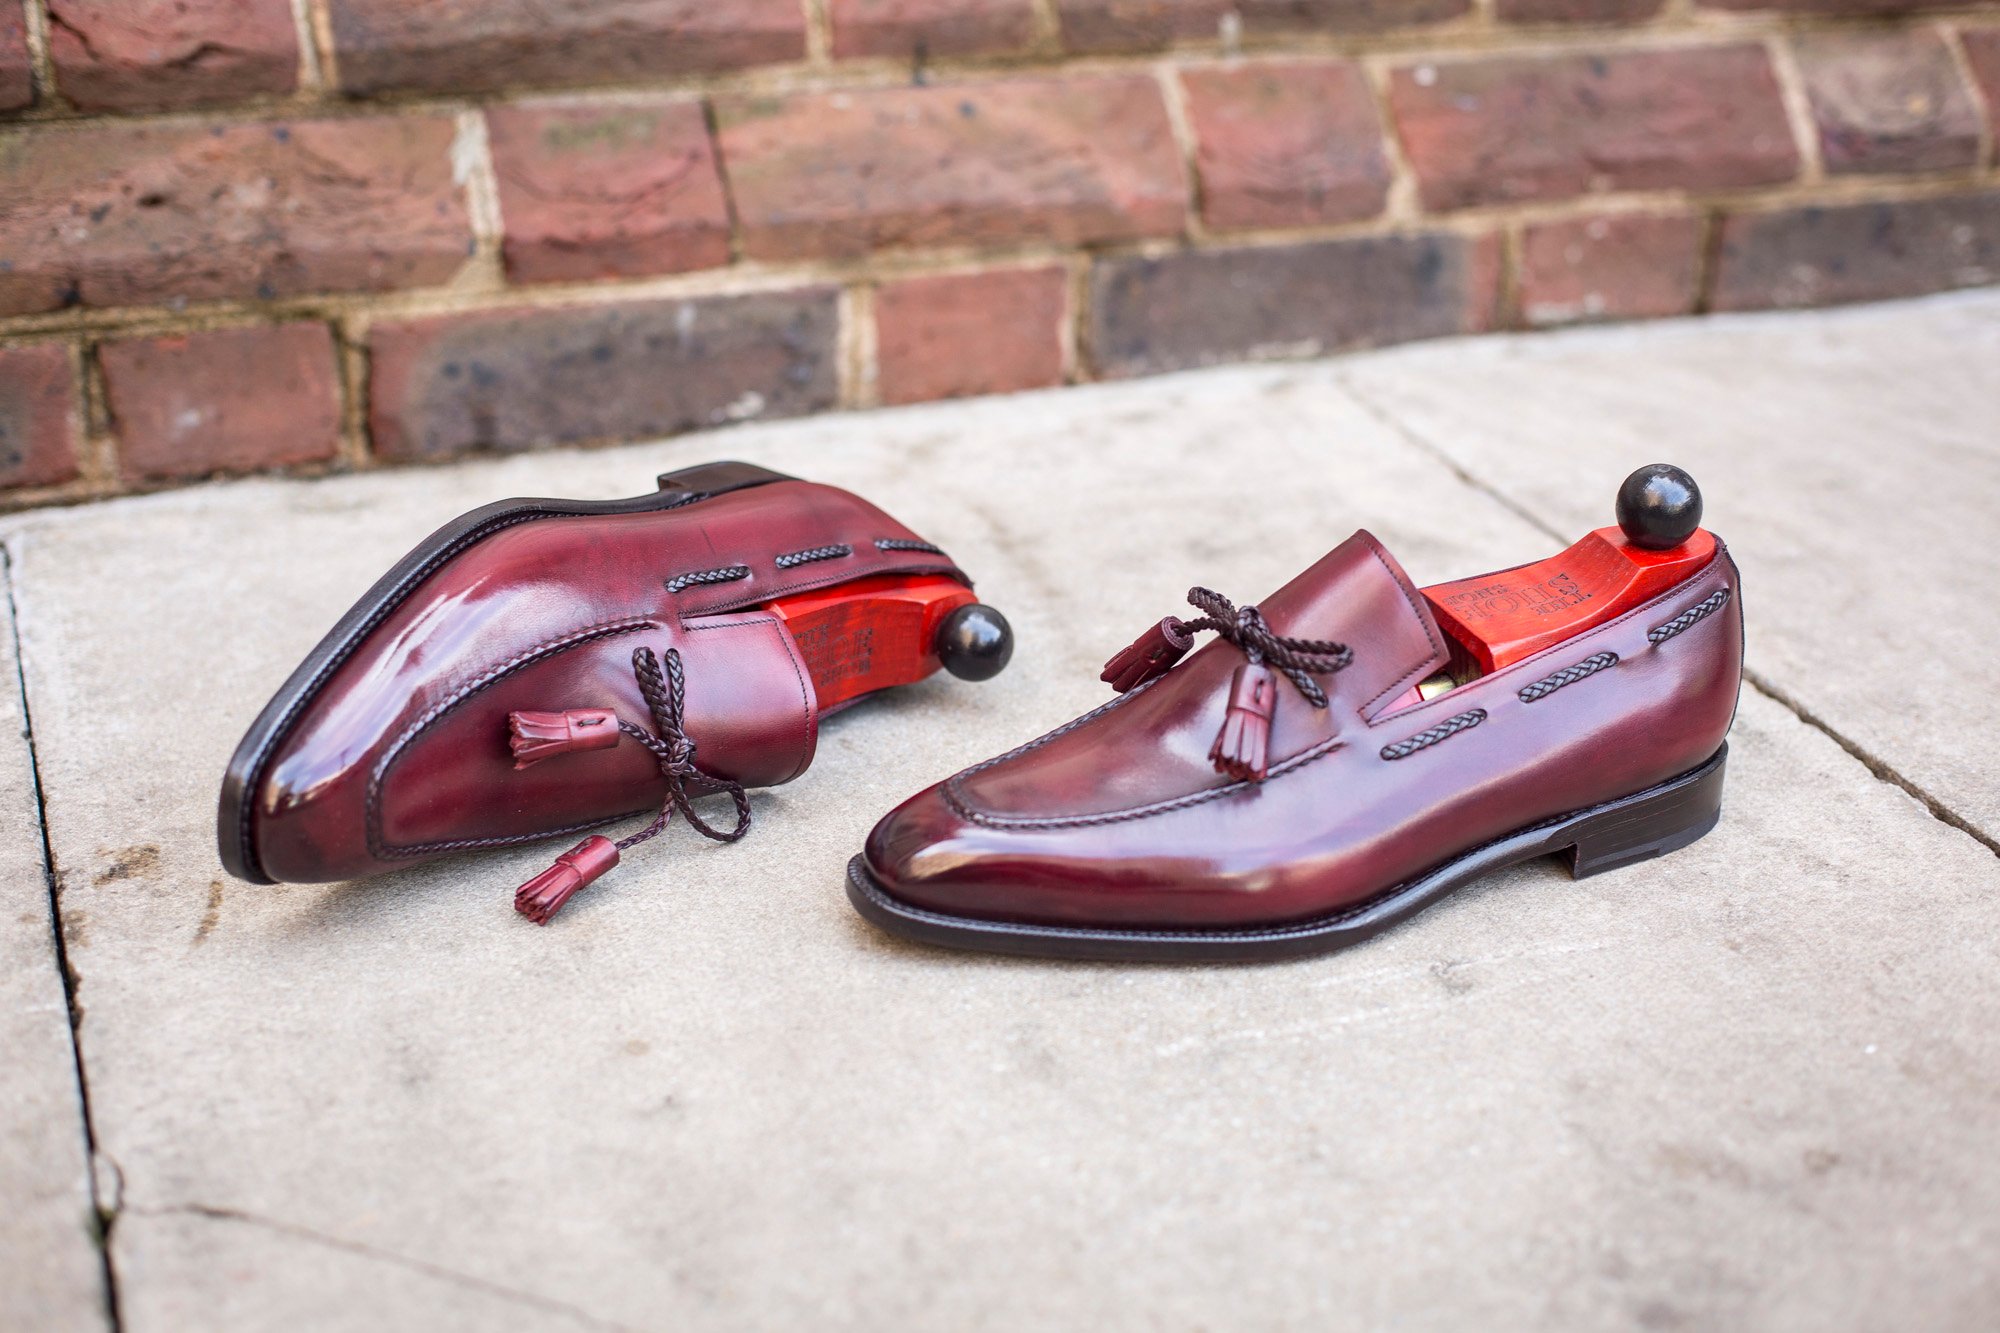 Introducing the Issaquah String Loafer - J.FitzPatrick Footwear